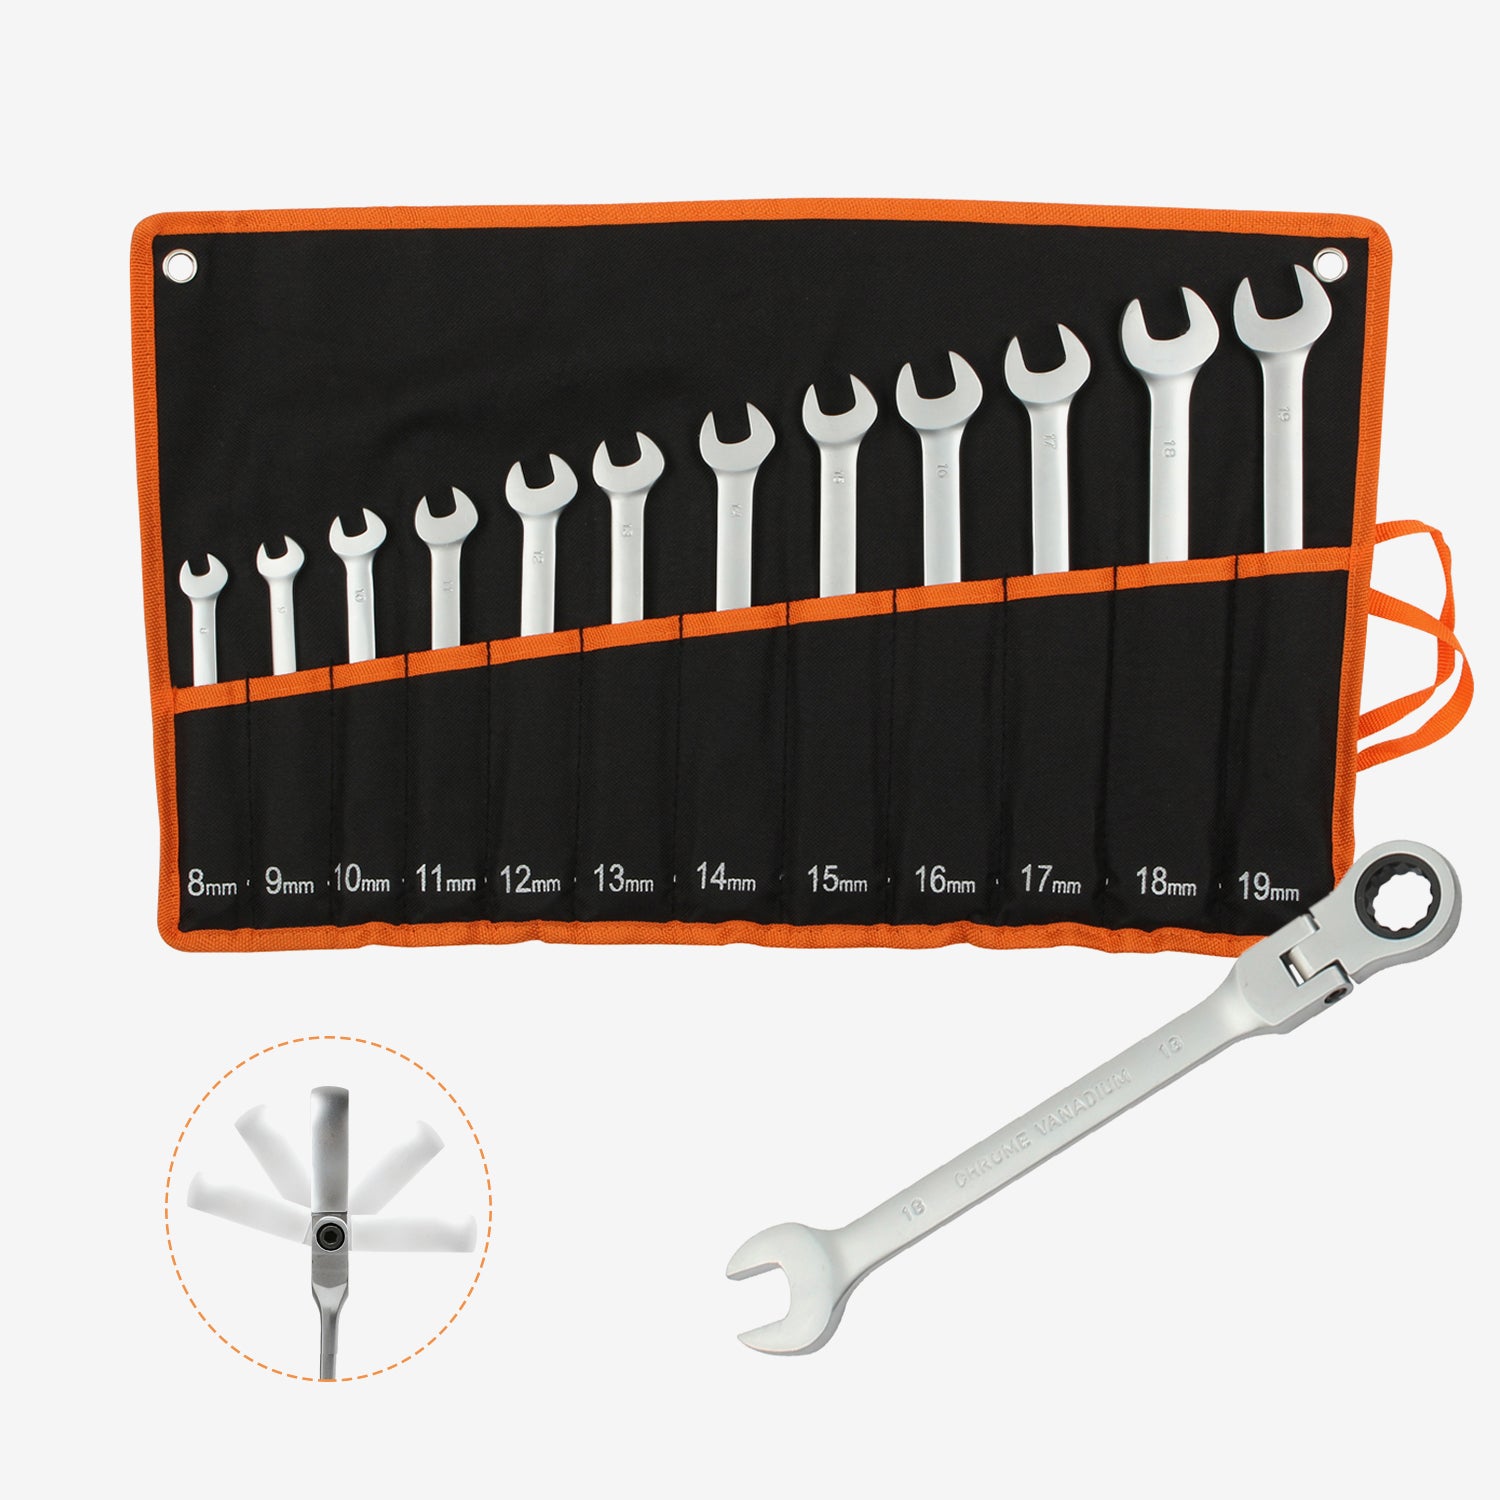 Todeco-Combination-Wrench-Set-with-Carry-Bag-12-Pieces-Ratchet-Spanners-Combination-Wrench-8-19-mm-Metric-Wrench-Set